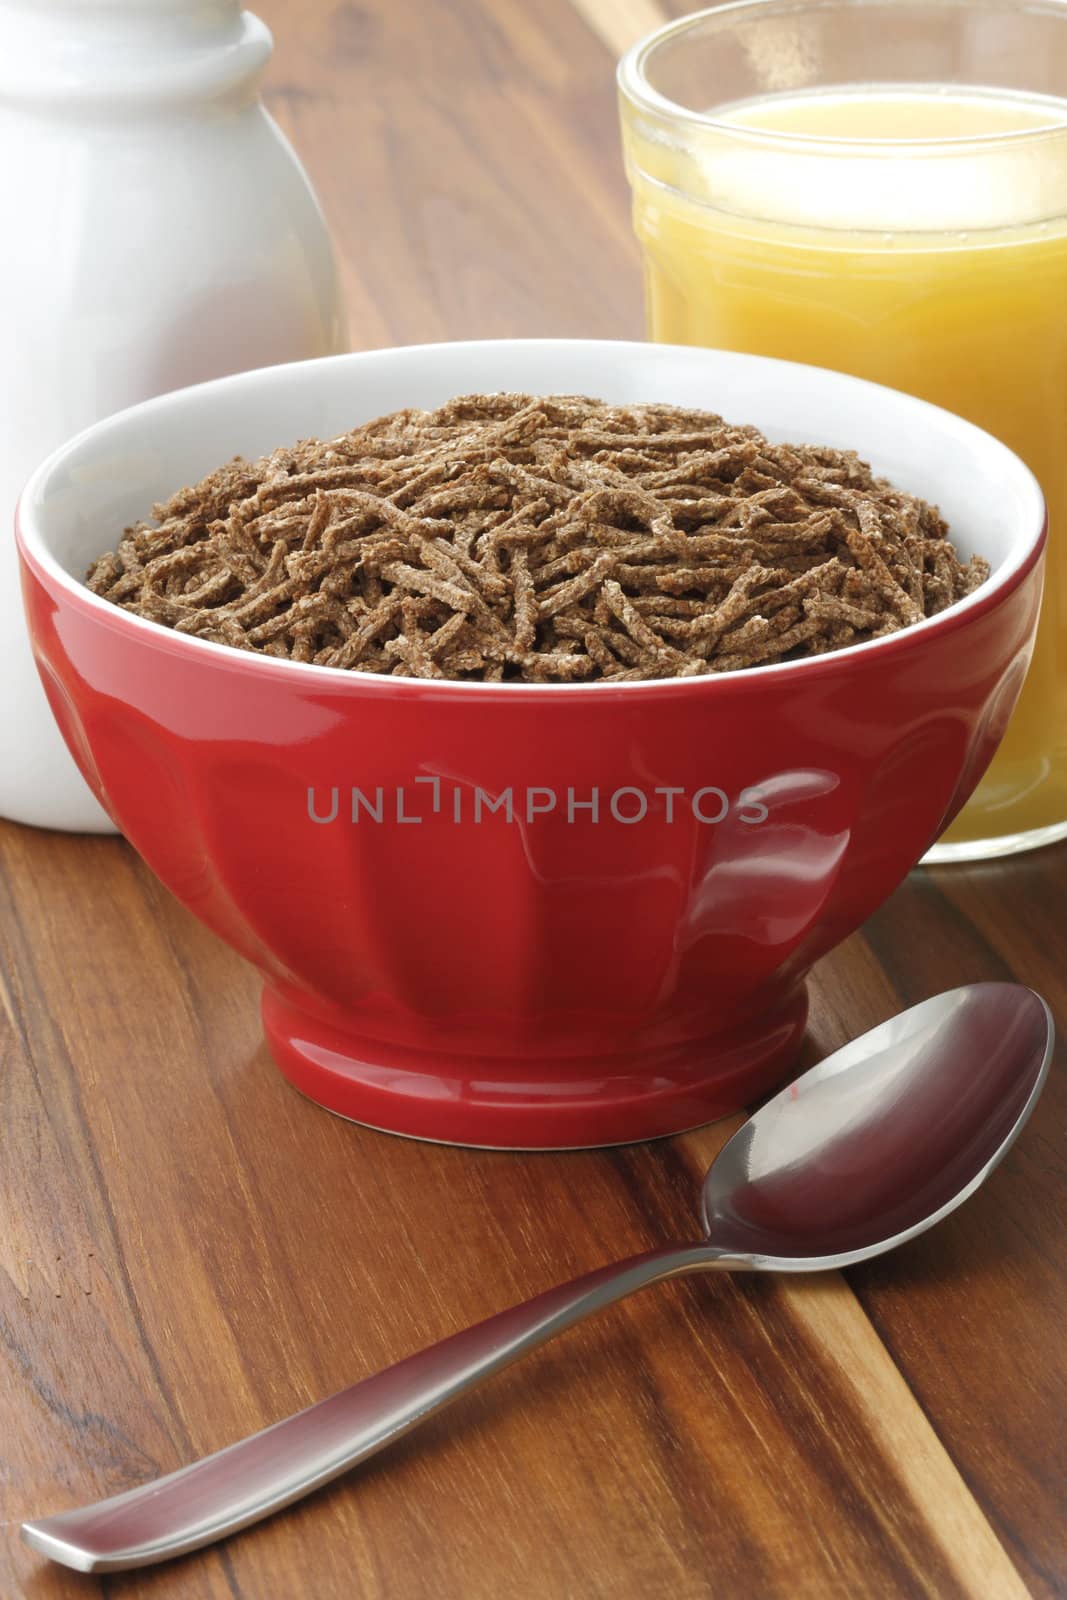 Delicious and nutritious cereal, high in bran, high in fiber, served in a beautiful  French Cafe au Lait Bowl with wide rims. In place of handles. This healthy bran cereal will be an aid to digestive health.